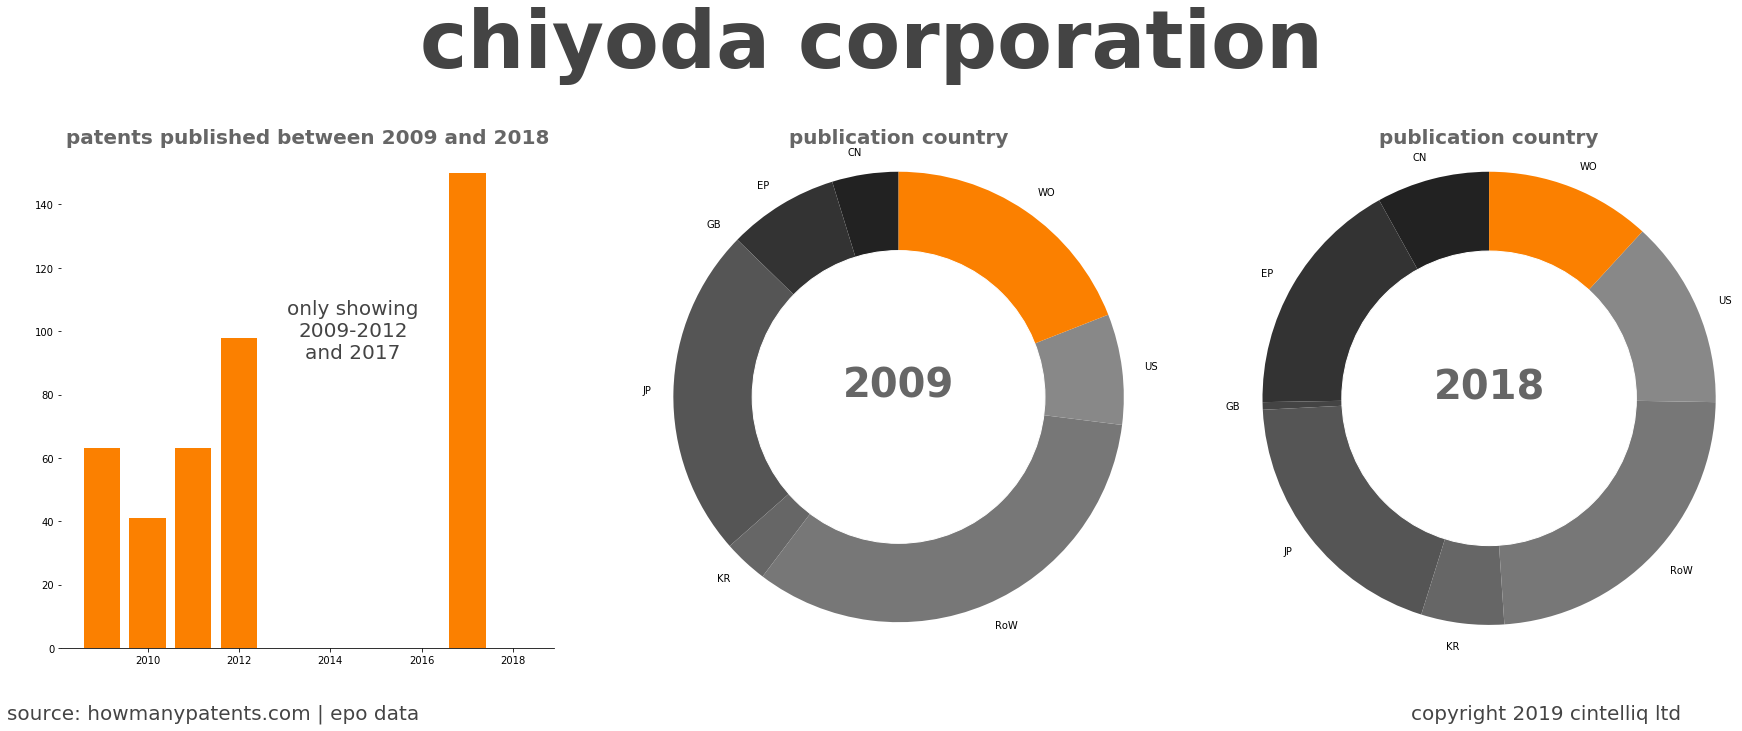 summary of patents for Chiyoda Corporation